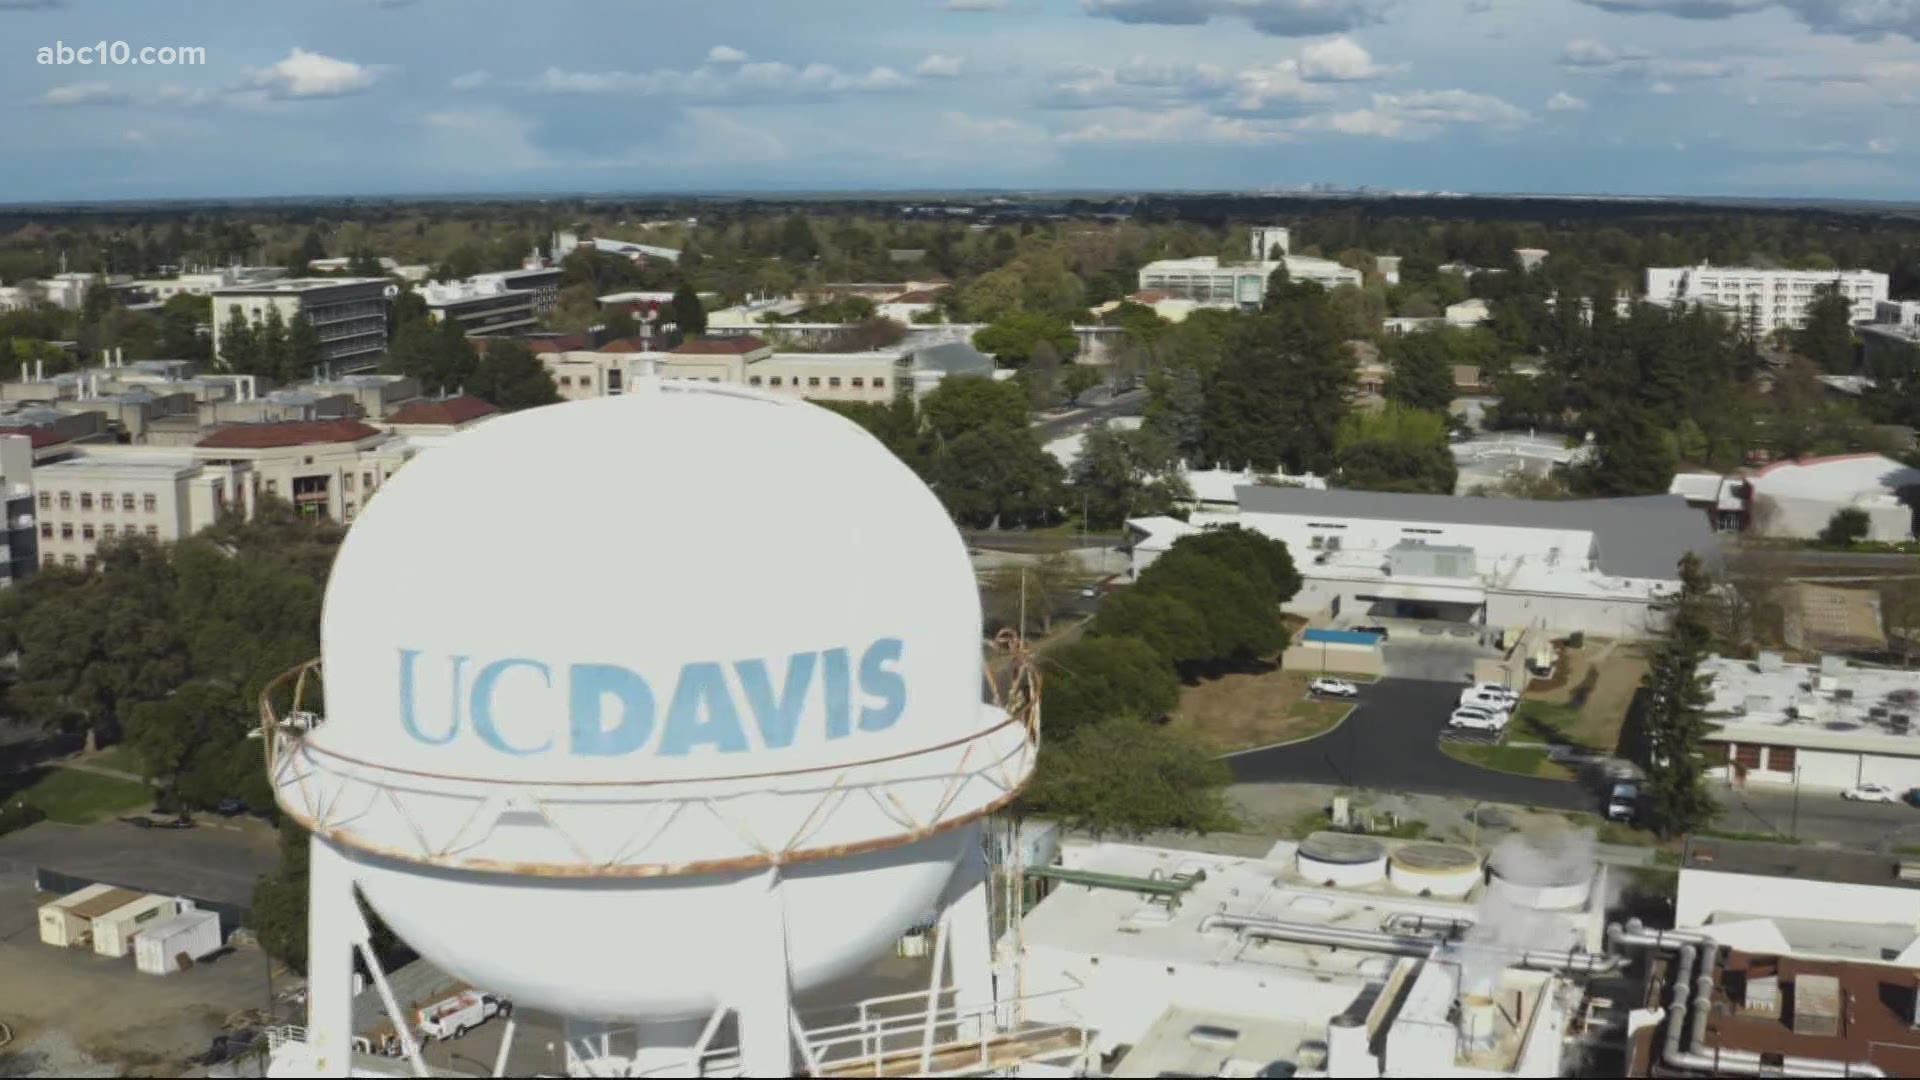 The university is offering $75 to students who opt for 'staycations' within the city of Davis.